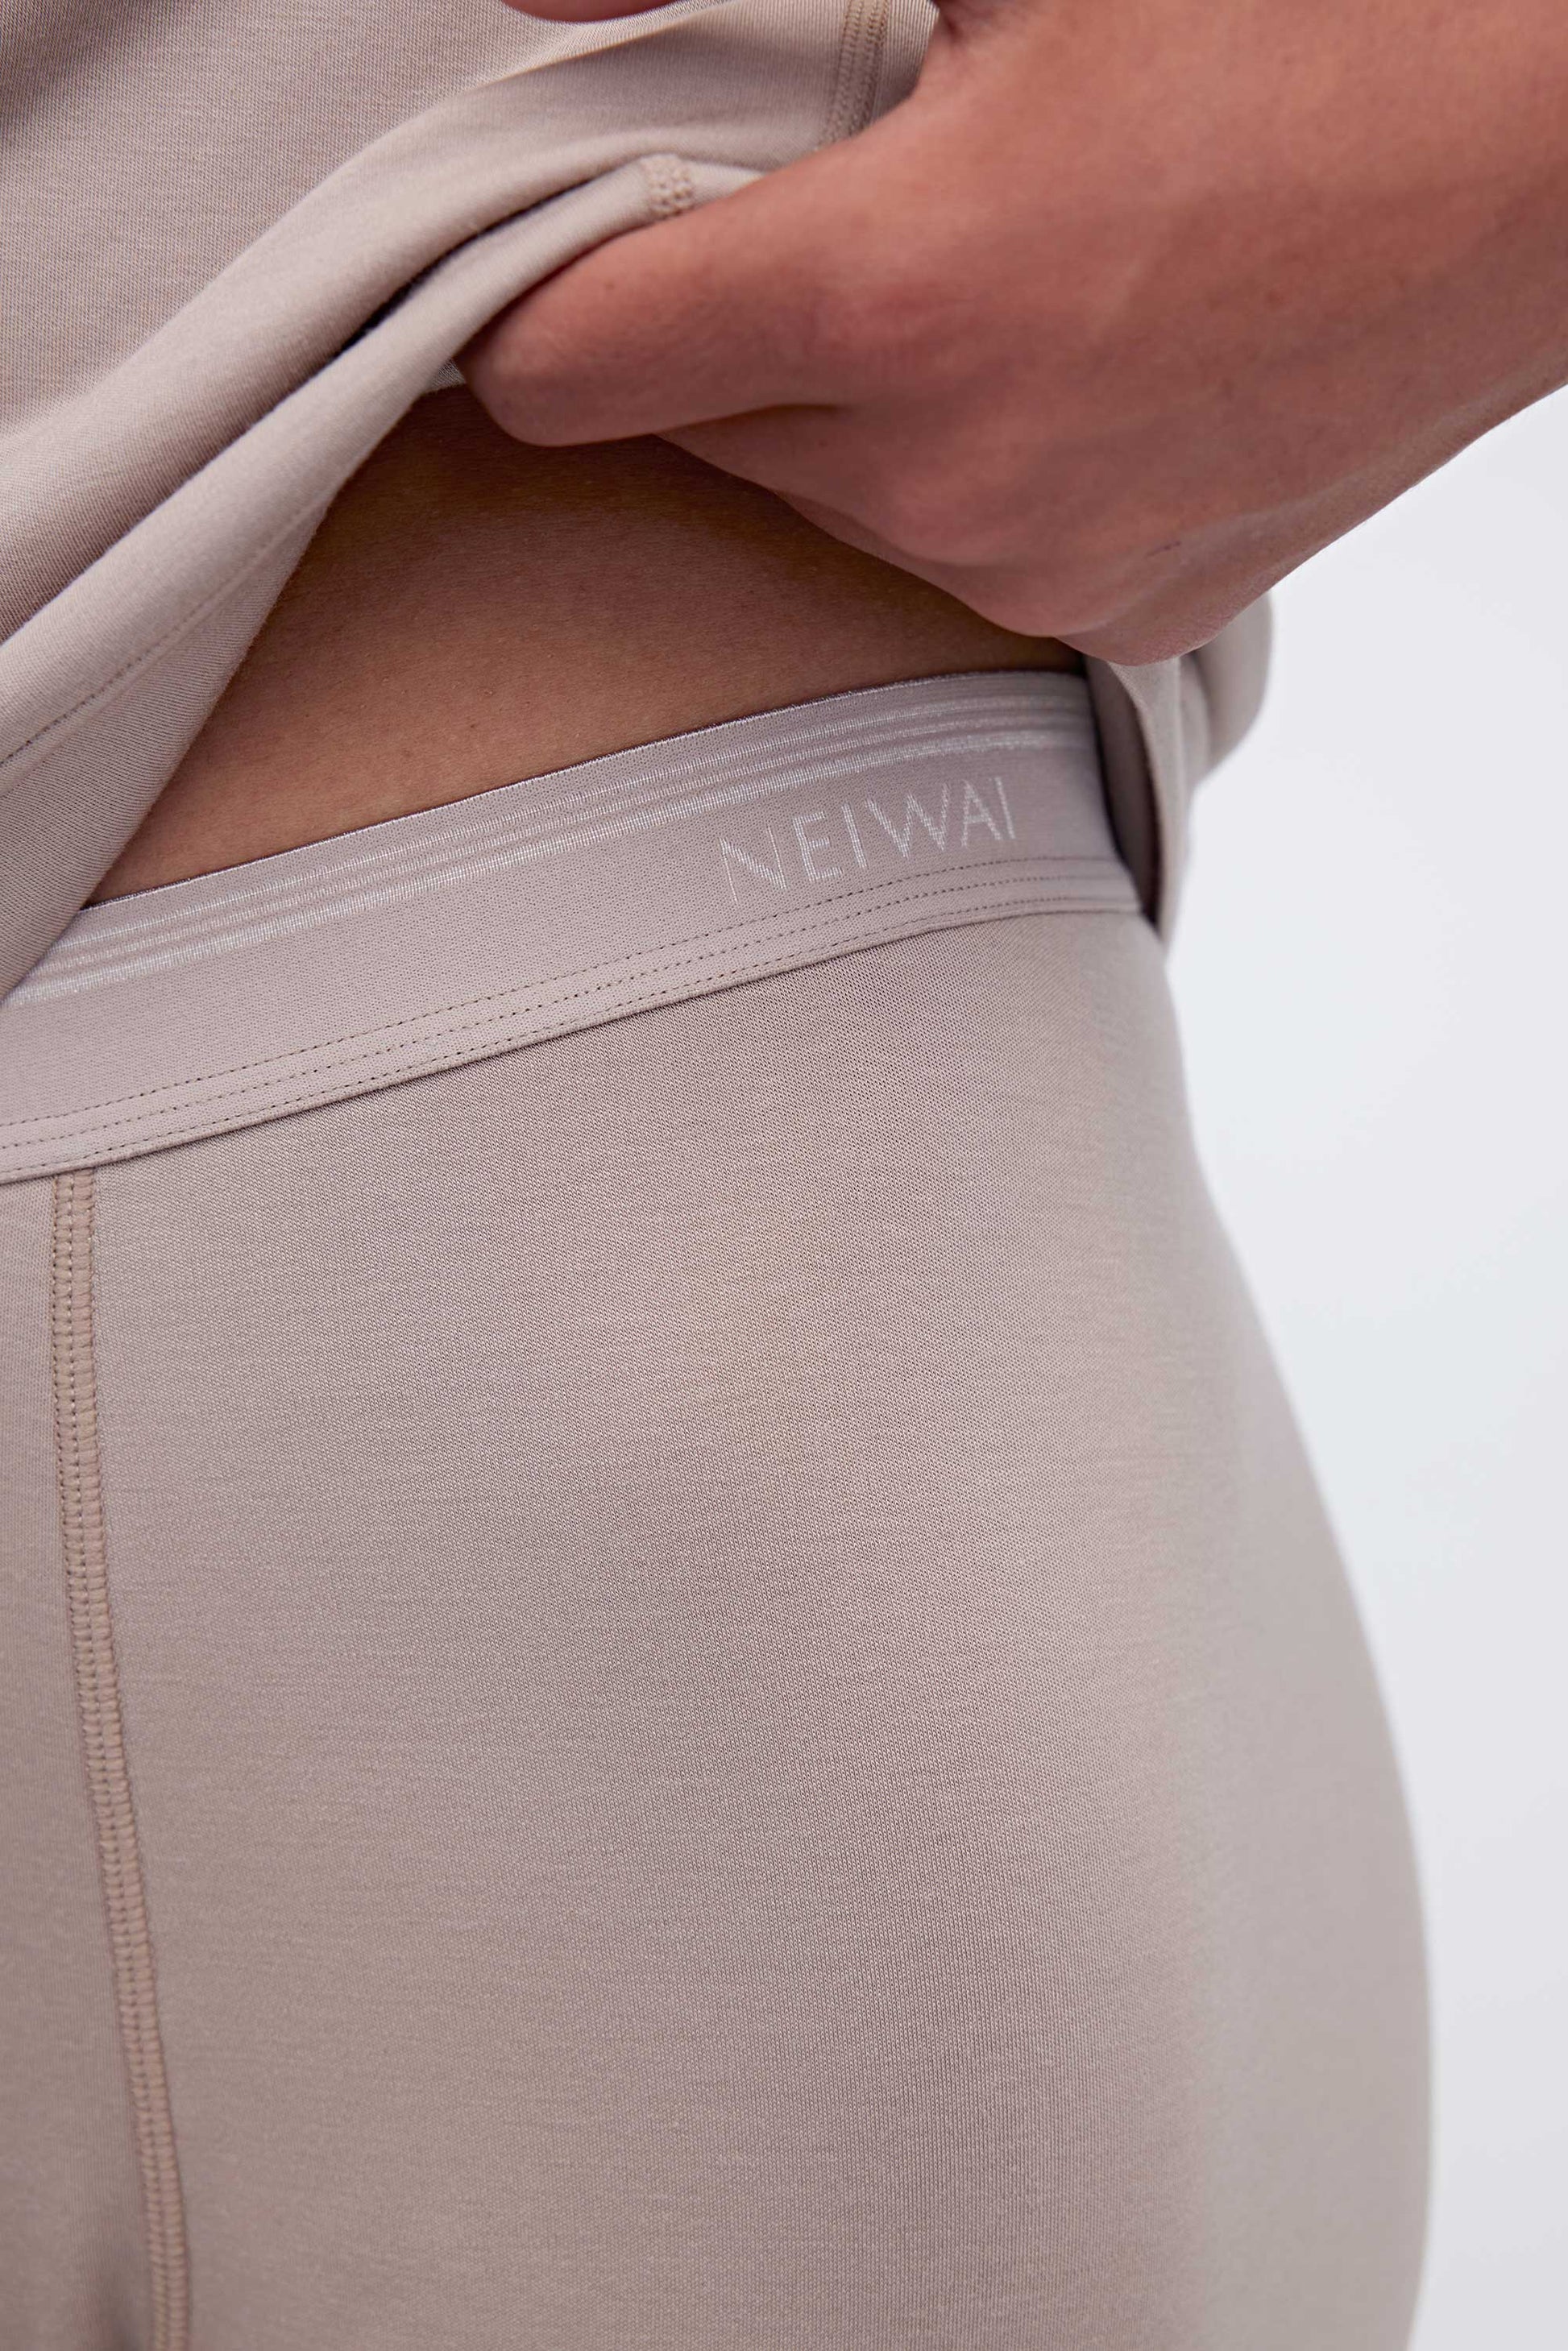 The thermal pants have the NEIWAI logo printed on the waist band.